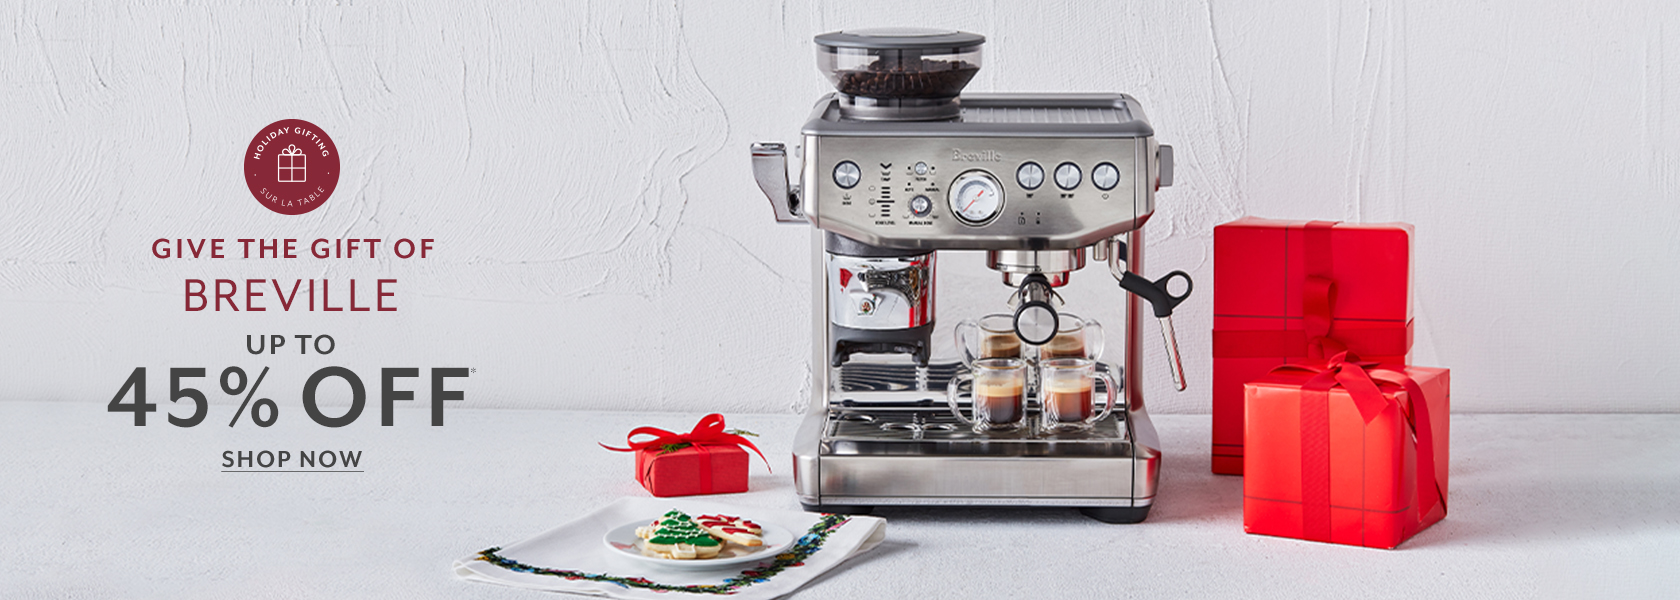 Give the gift of Breville up to 45% off, shop now.